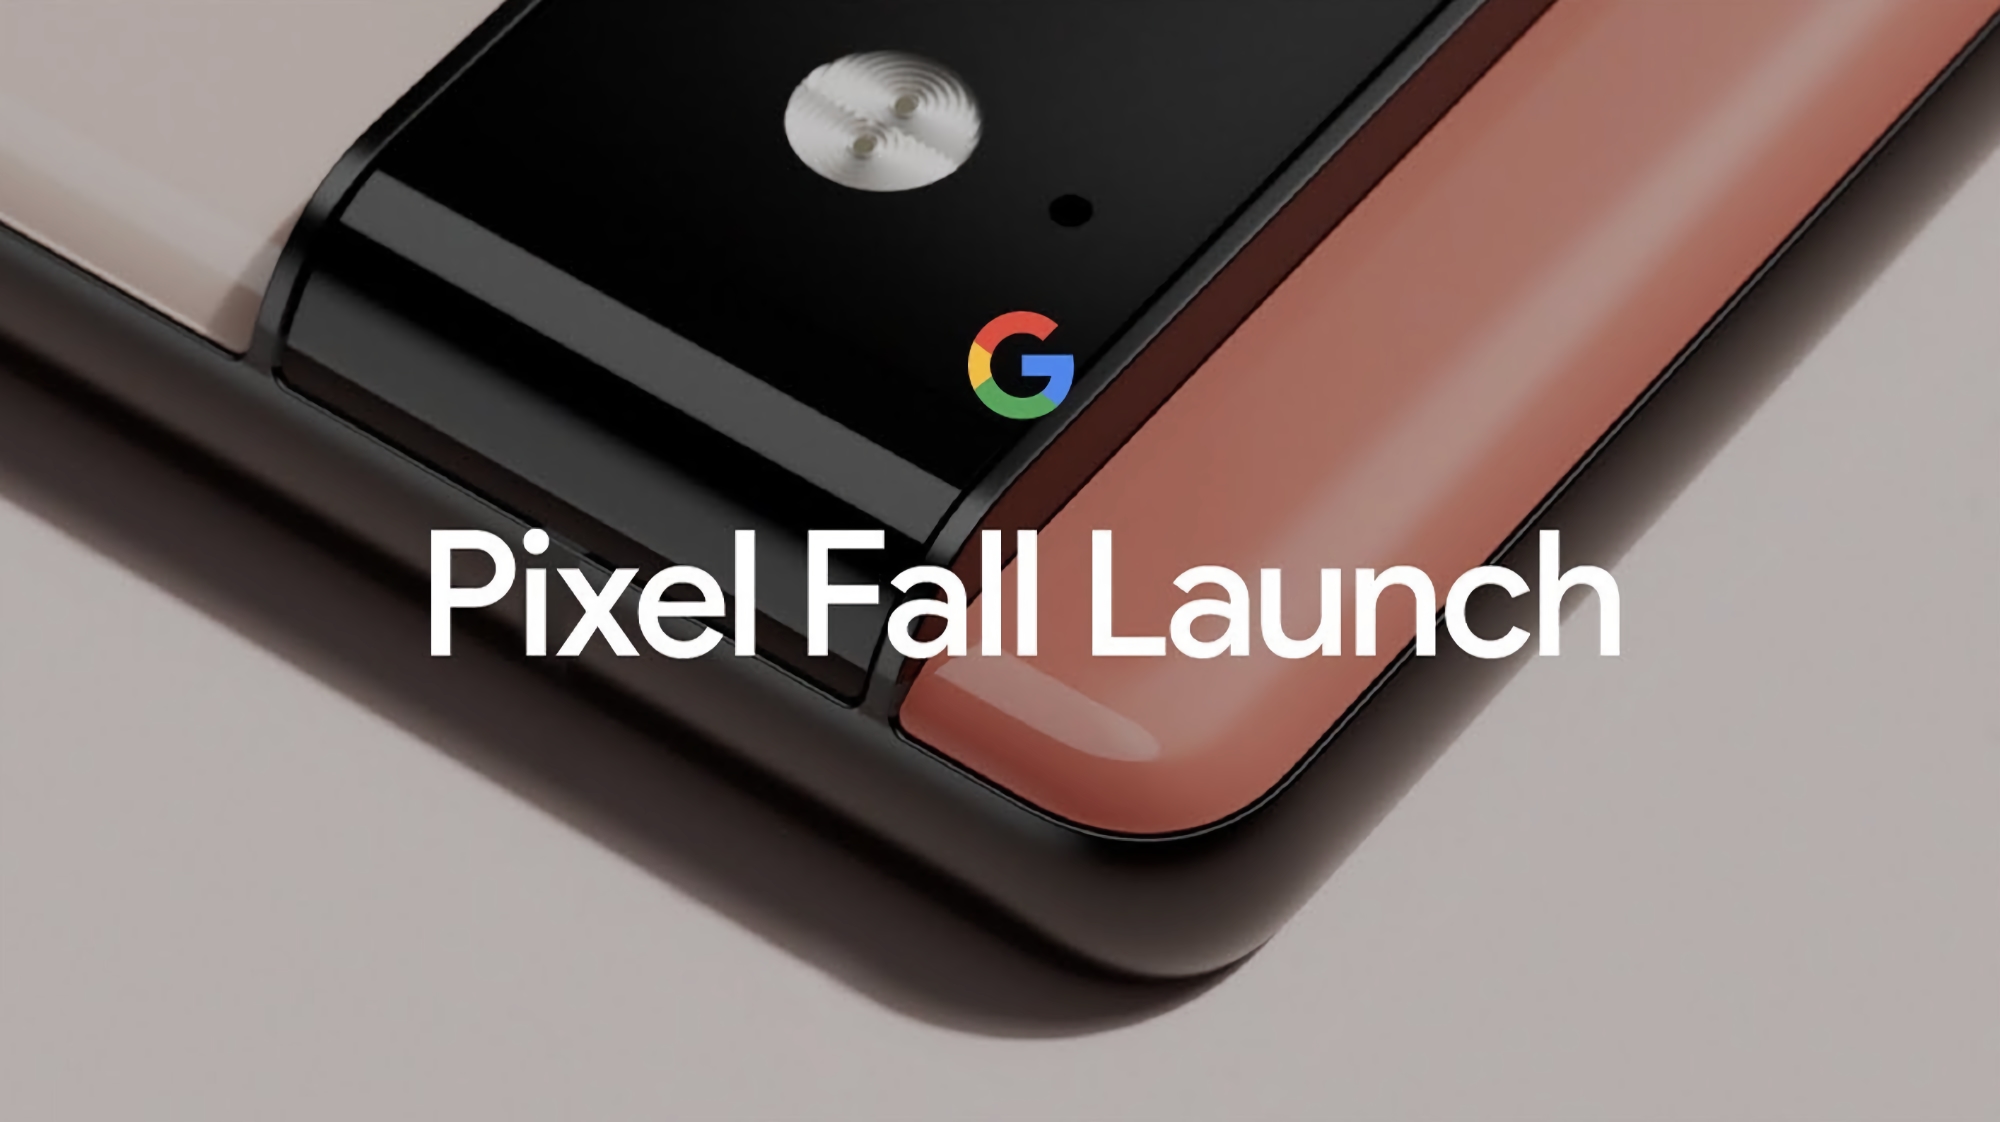 Where and when to watch the launch of Google Pixel 6 and Pixel 6 Pro smartphones